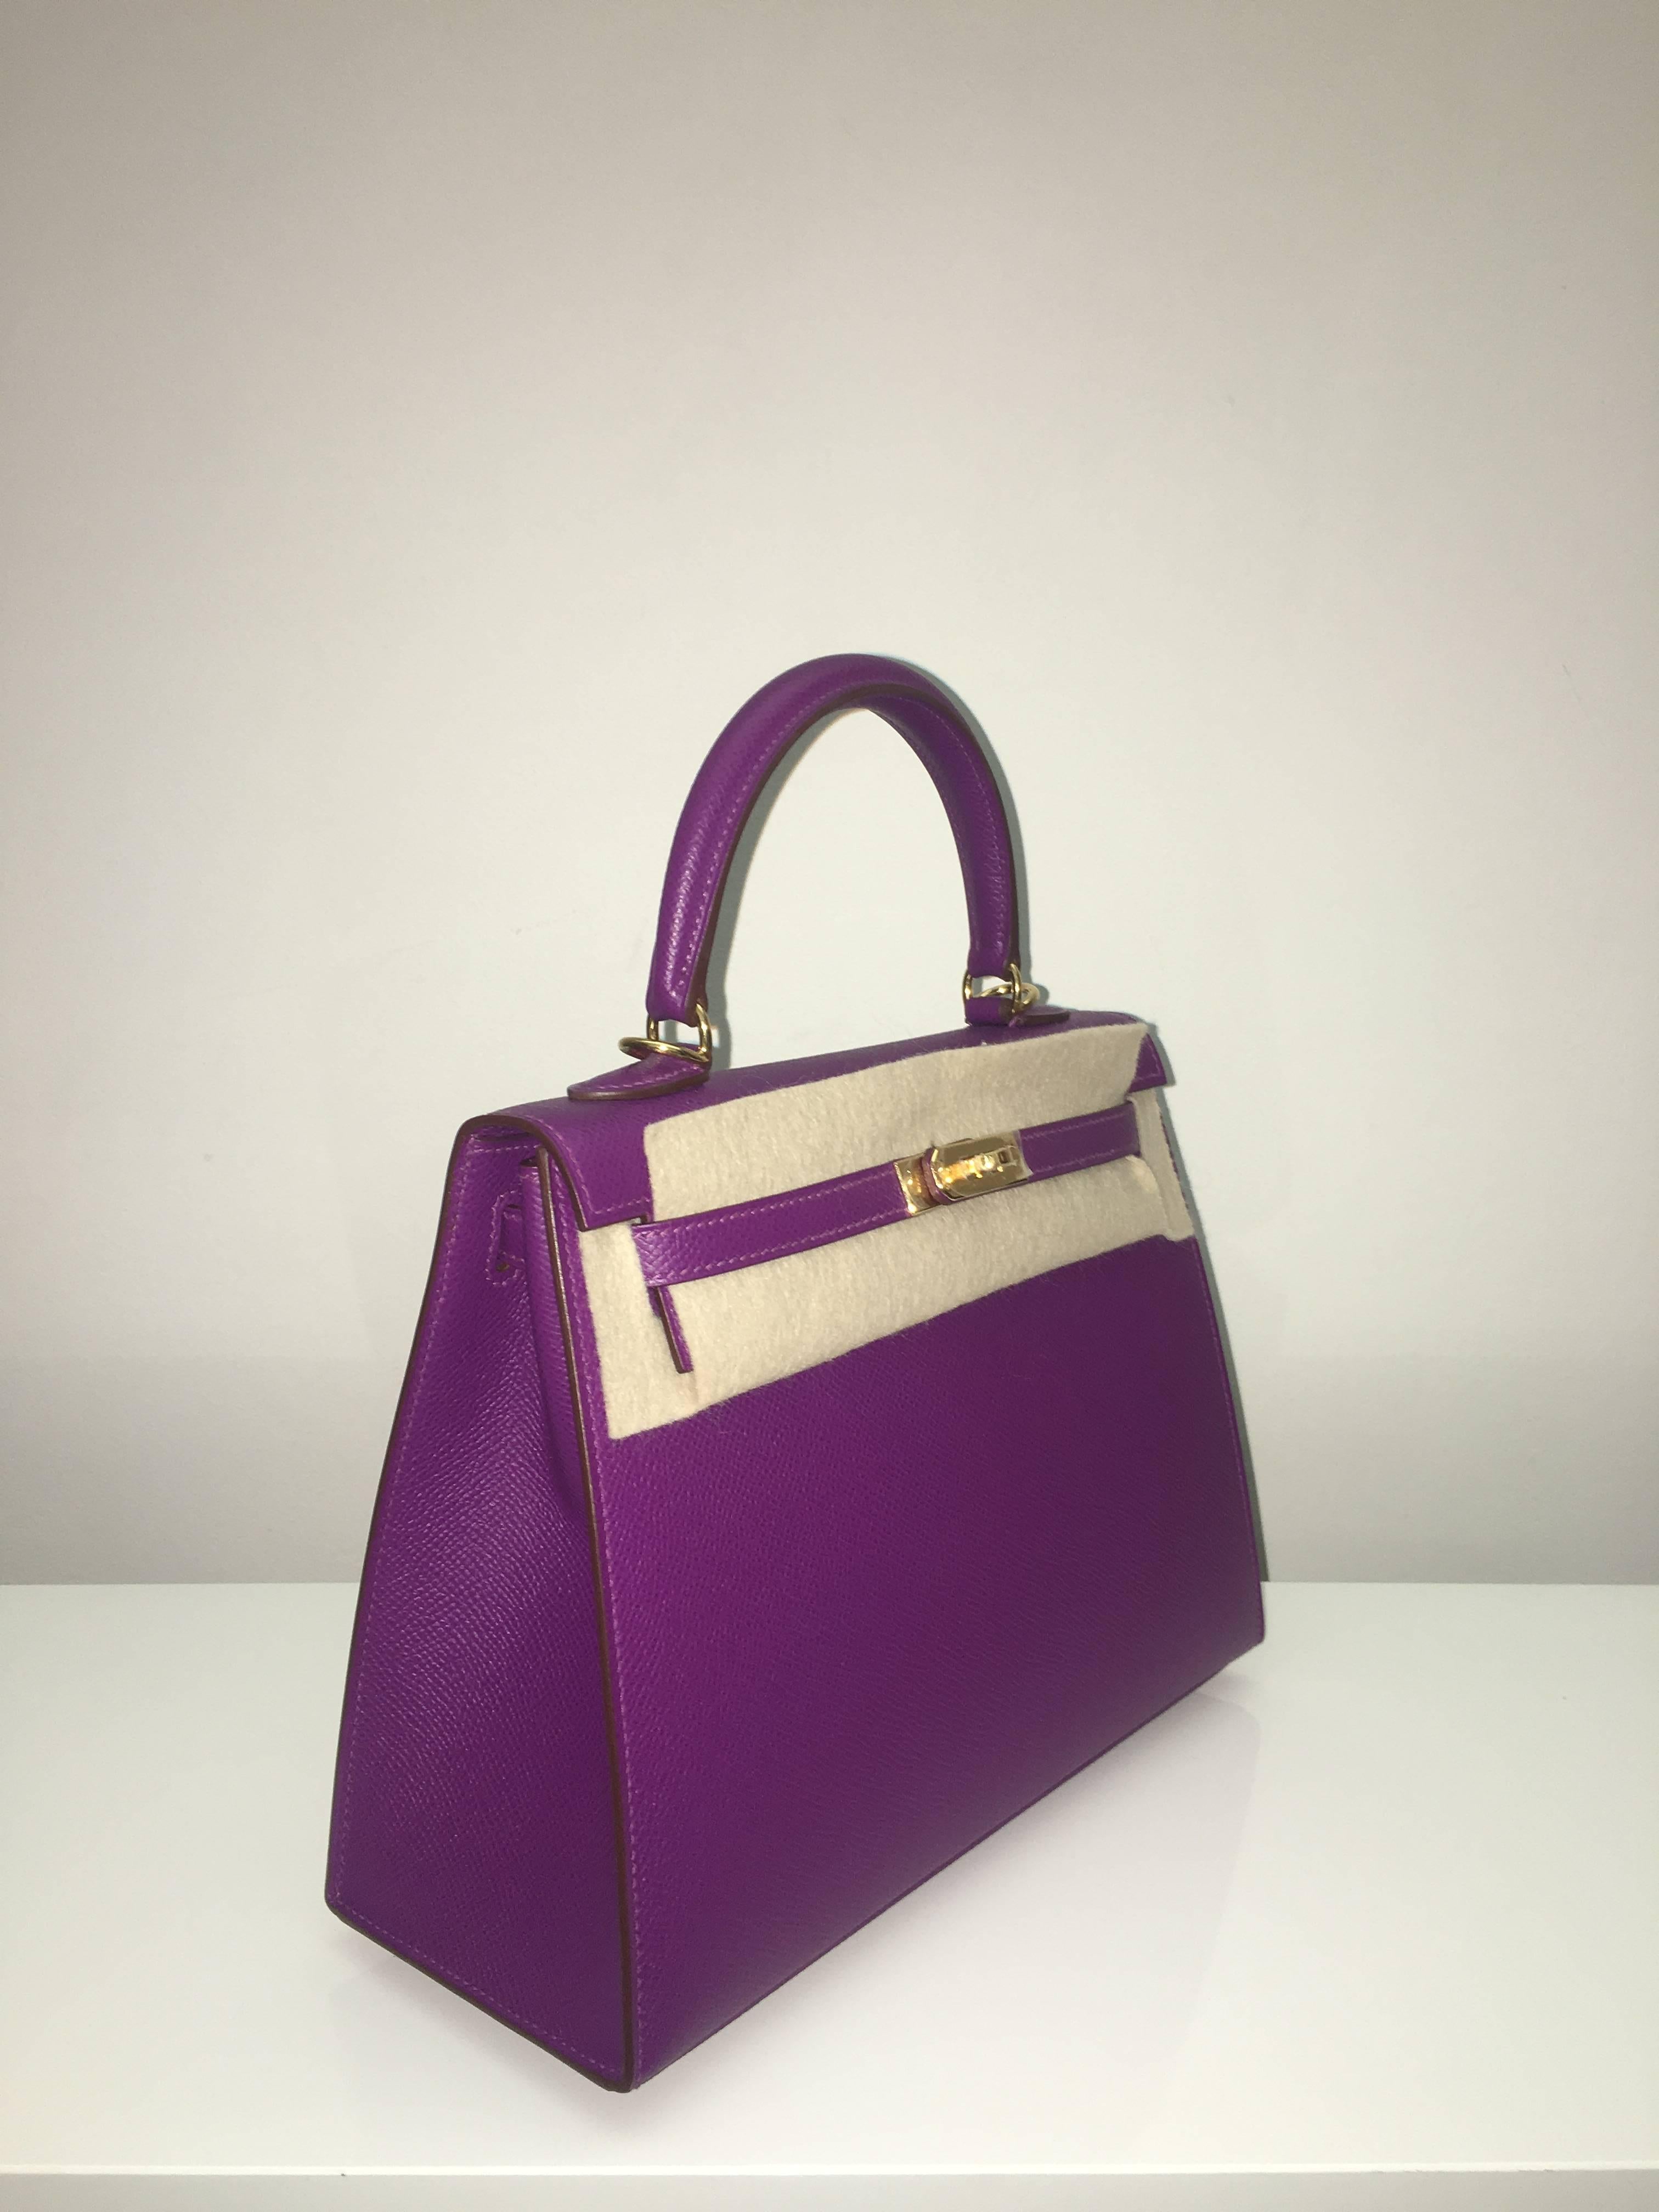 Hermes 
Kelly Size 25
Epsom Leather 
Colour Anemone
Gold Hardware 
store fresh, comes with receipt and full set (dust bag, box...) 
Hydeparkfashion specializes in sourcing and delivering authentic luxury handbags, mainly Hermes, to client